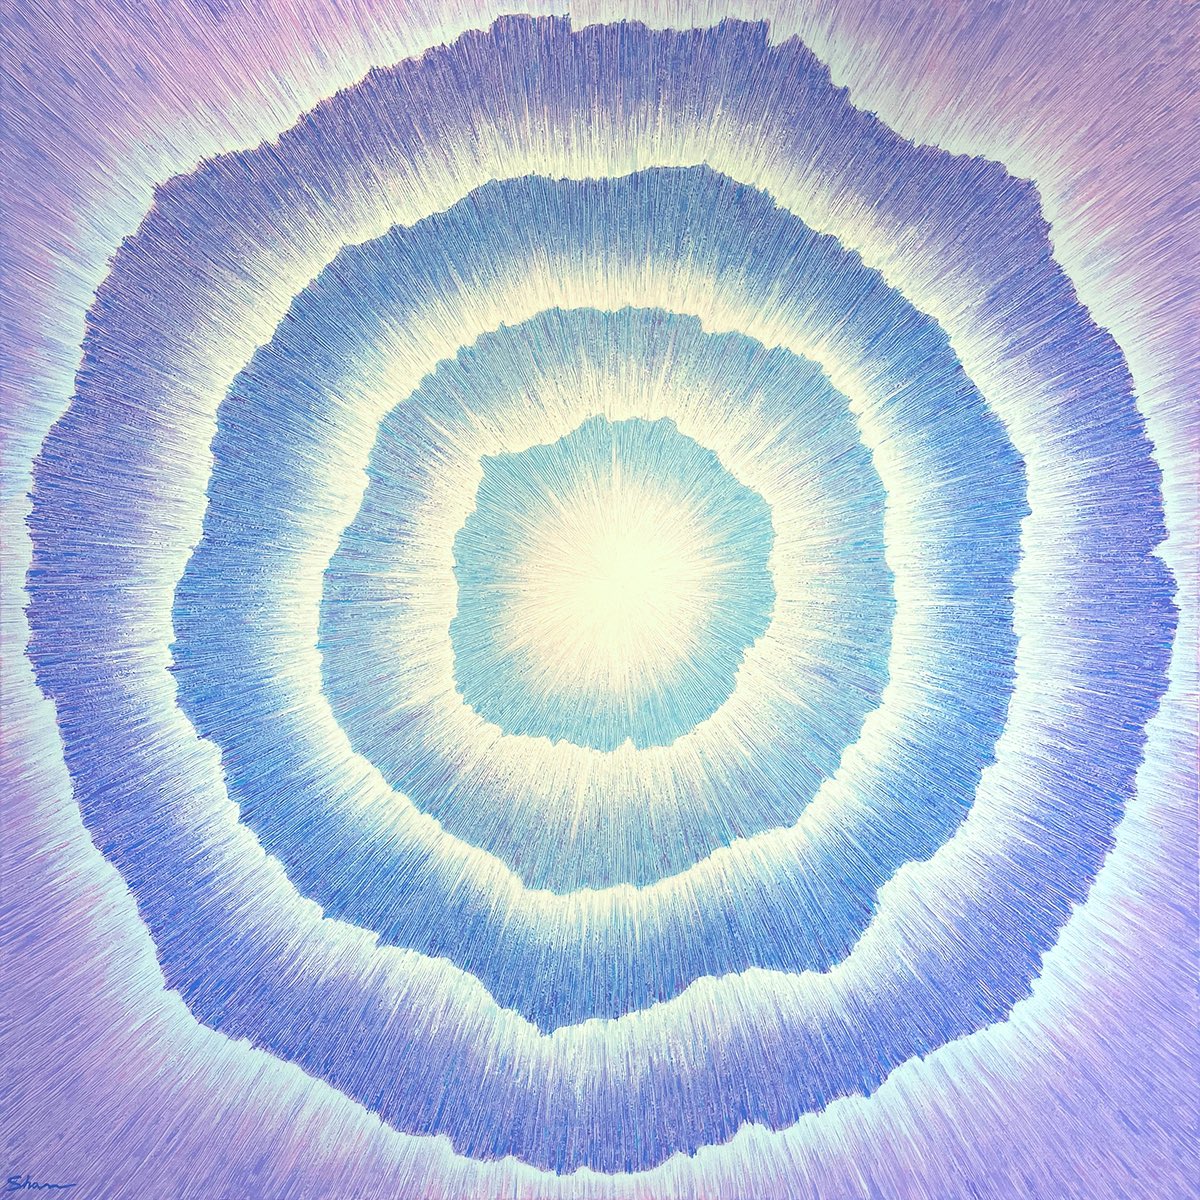 “Blue Supernova,” Shan Ogdemli, 60 x 60 inches, acrylic and diatomaceous earth on canvas. Blue Supernova is inspired by supernova explosions at the end of a star’s life, leaving behind spectacular nebula remnants of various colors. Sold!